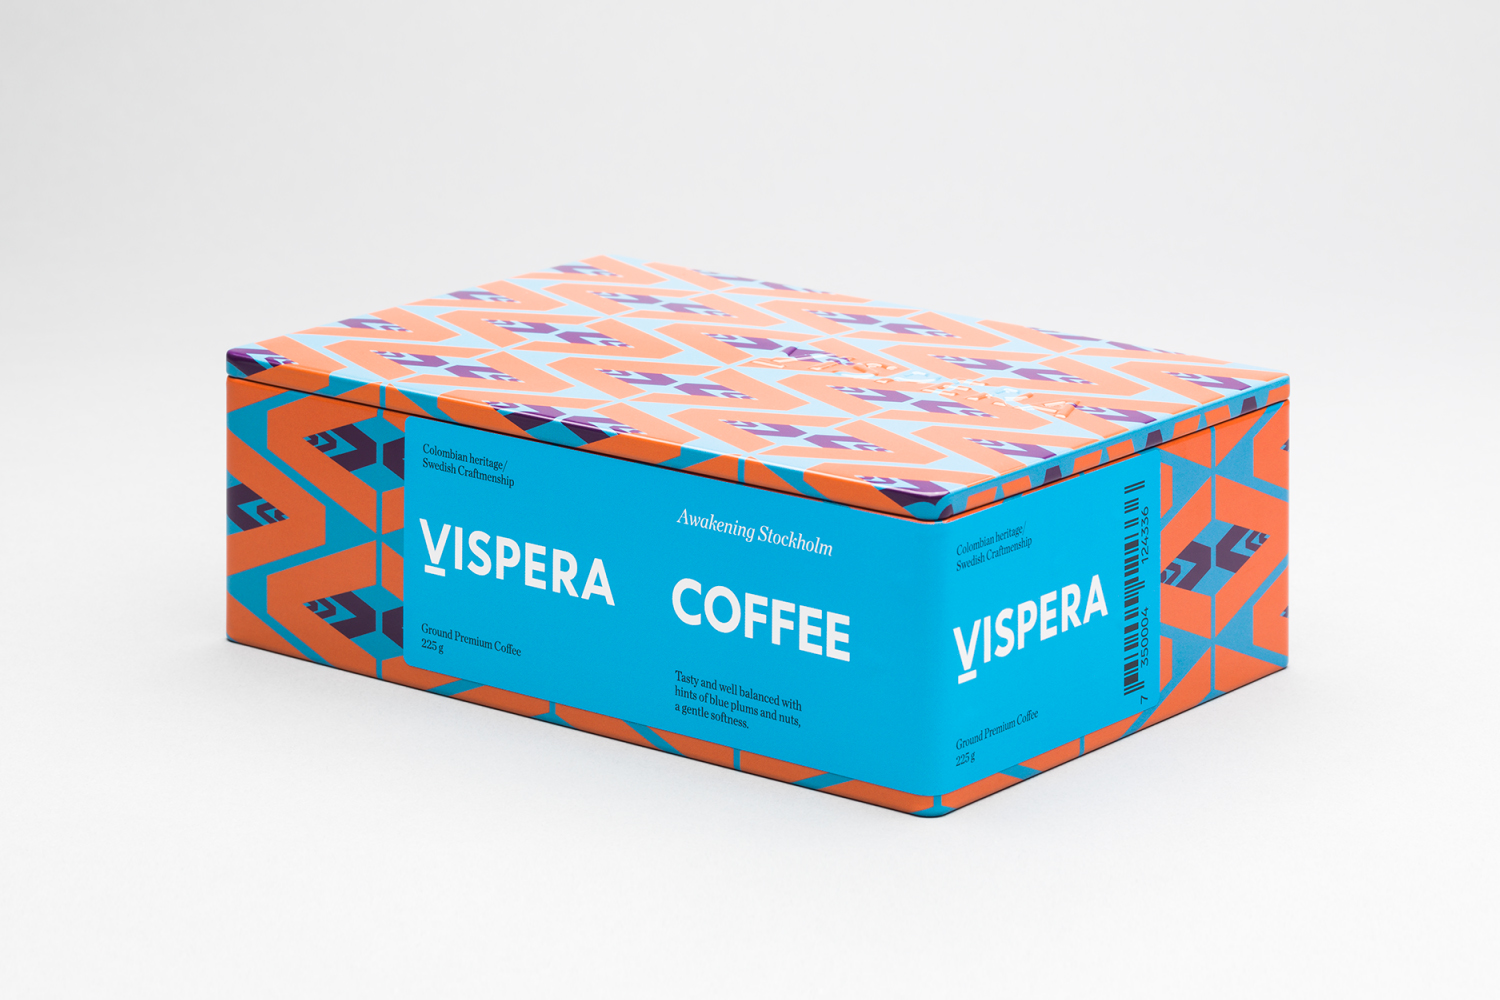 Packaging created by Stockholm Design Lab for Víspera Coffee, a range of 100% Arabica beans sourced from the high altitude plantations of Columbia.